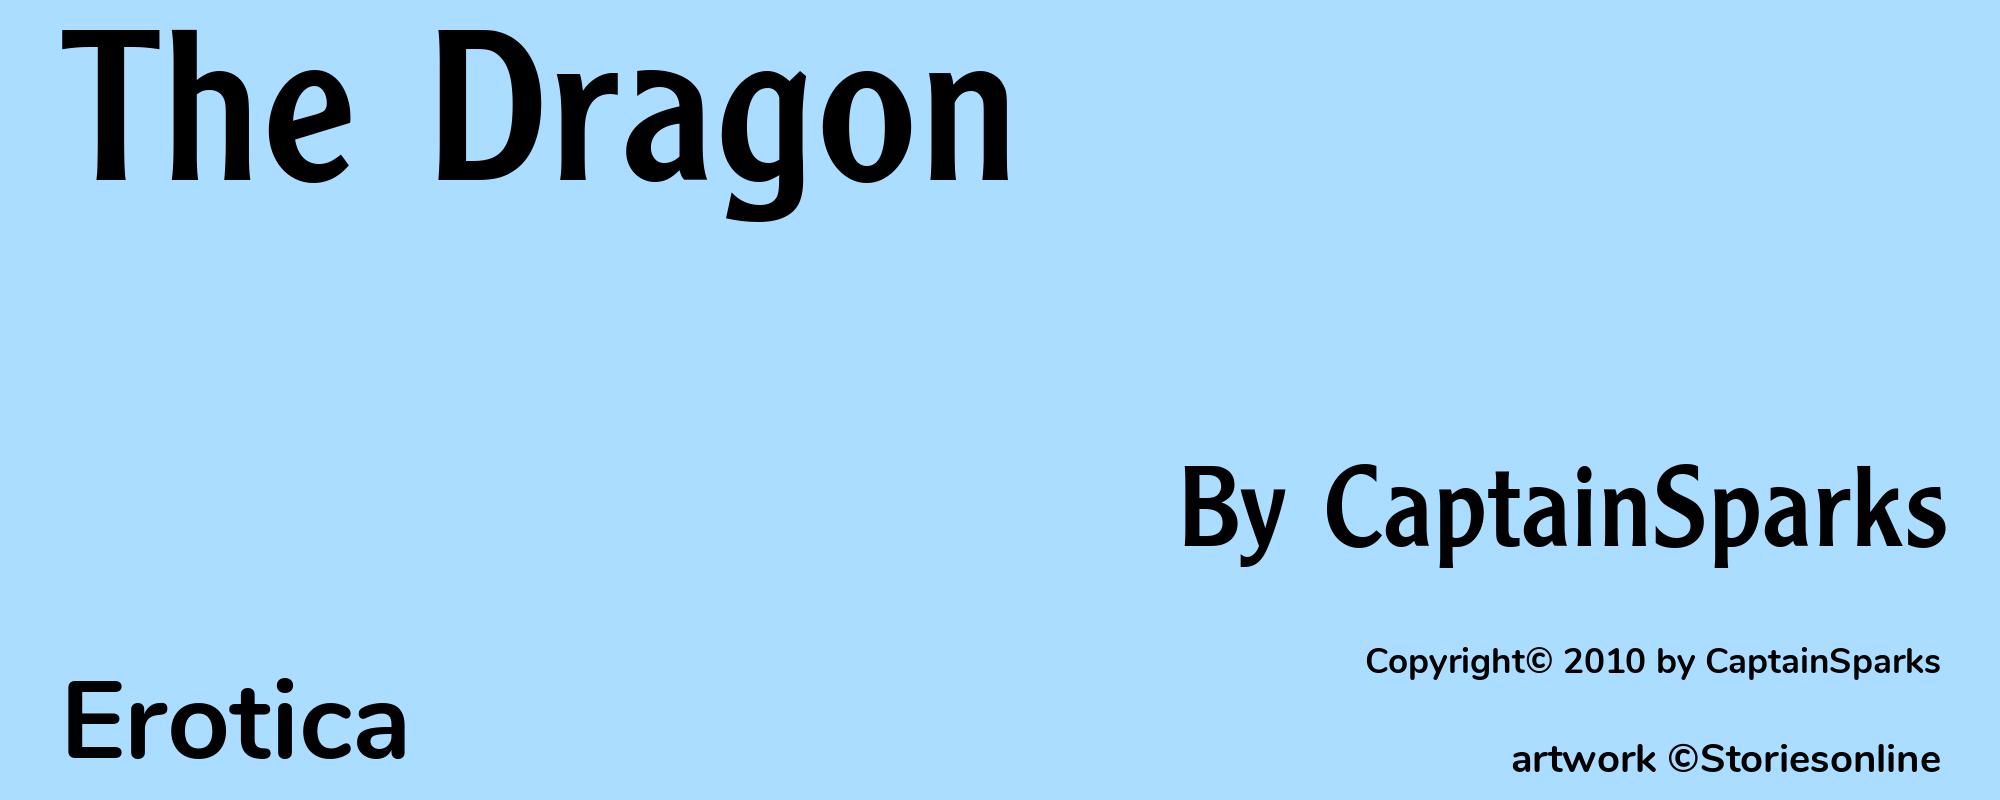 The Dragon - Cover